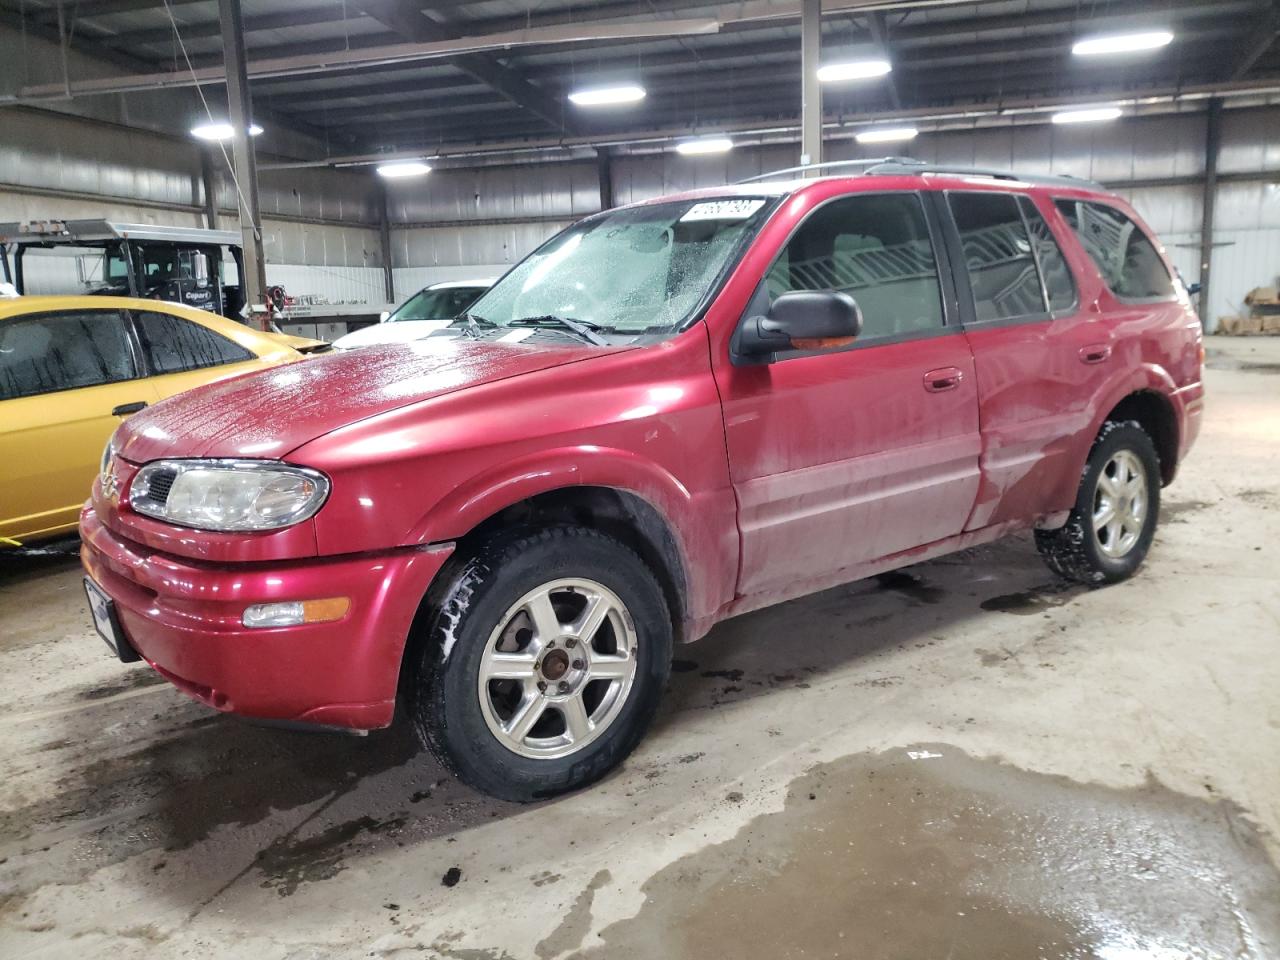 2002 Oldsmobile Bravada for sale at Copart Des Moines, IA Lot #41650*** |  SalvageReseller.com